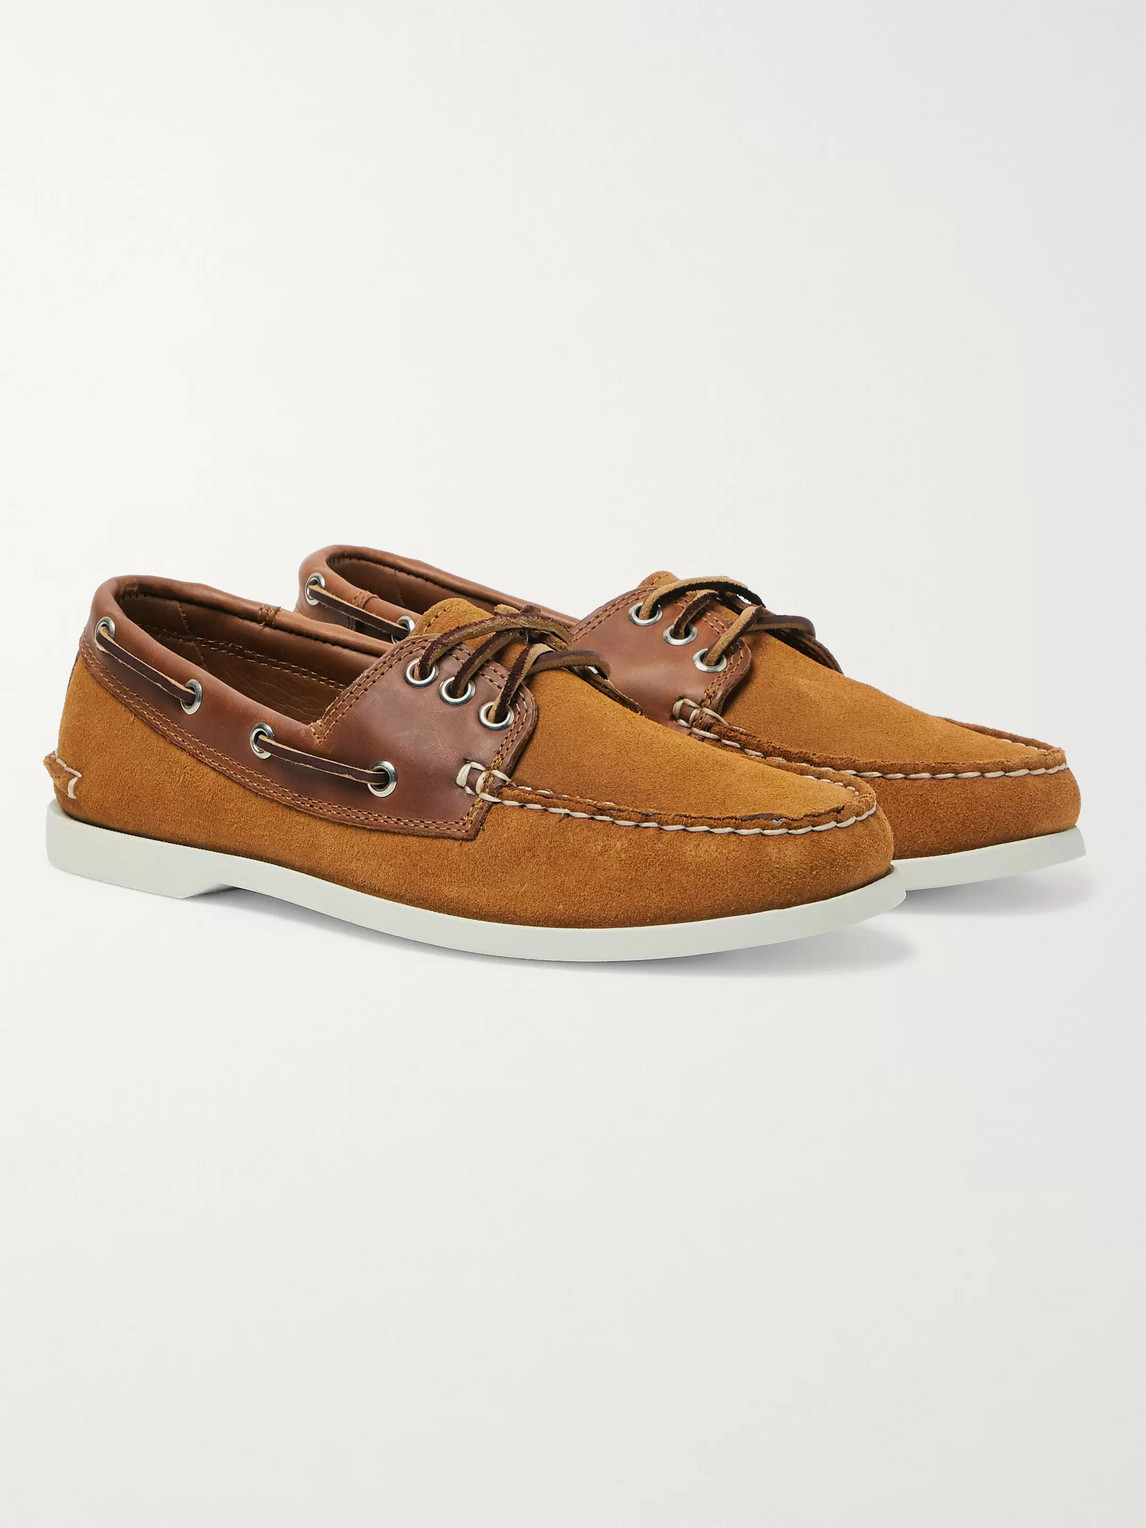 Quoddy Downeast Suede And Leather Boat Shoes In Brown